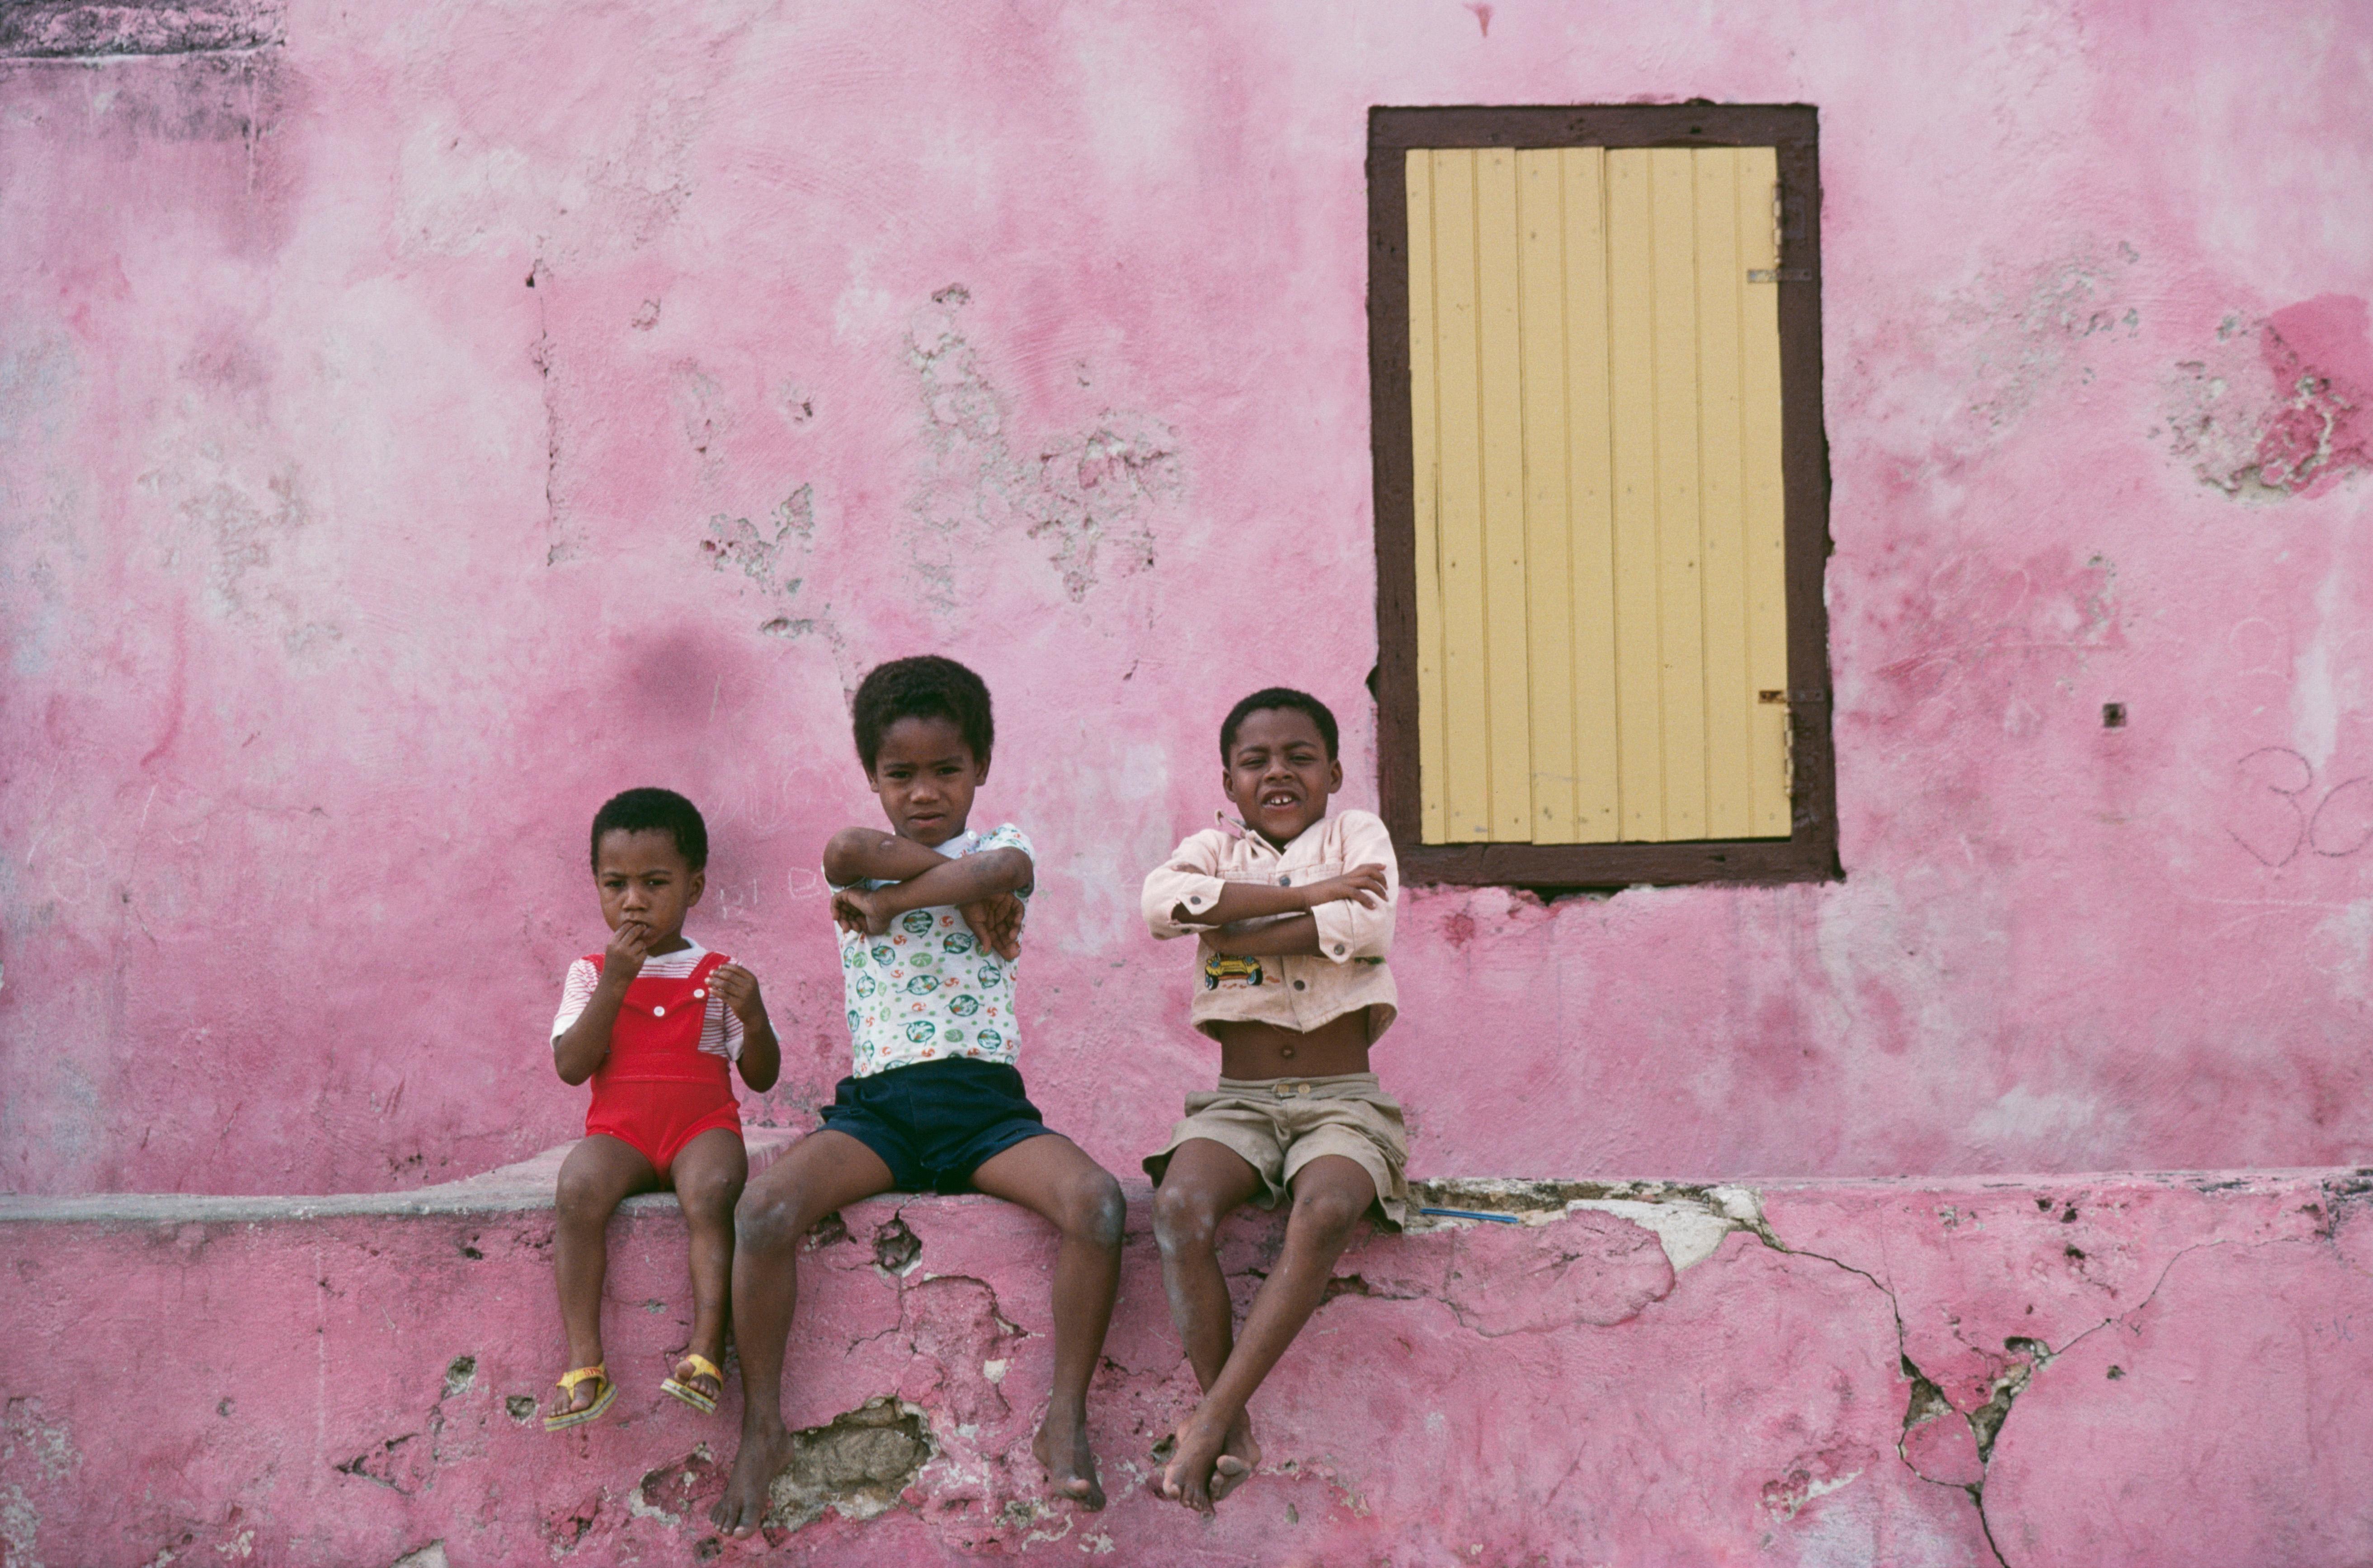 'Curacao Children' 1979 Slim Aarons Limited Estate Edition Print 

Three local children sitting on a low wall, Curacao, Netherlands Antilles, January 1979. (Photo by Slim Aarons/Getty Images)

Produced from the original transparency
Certificate of